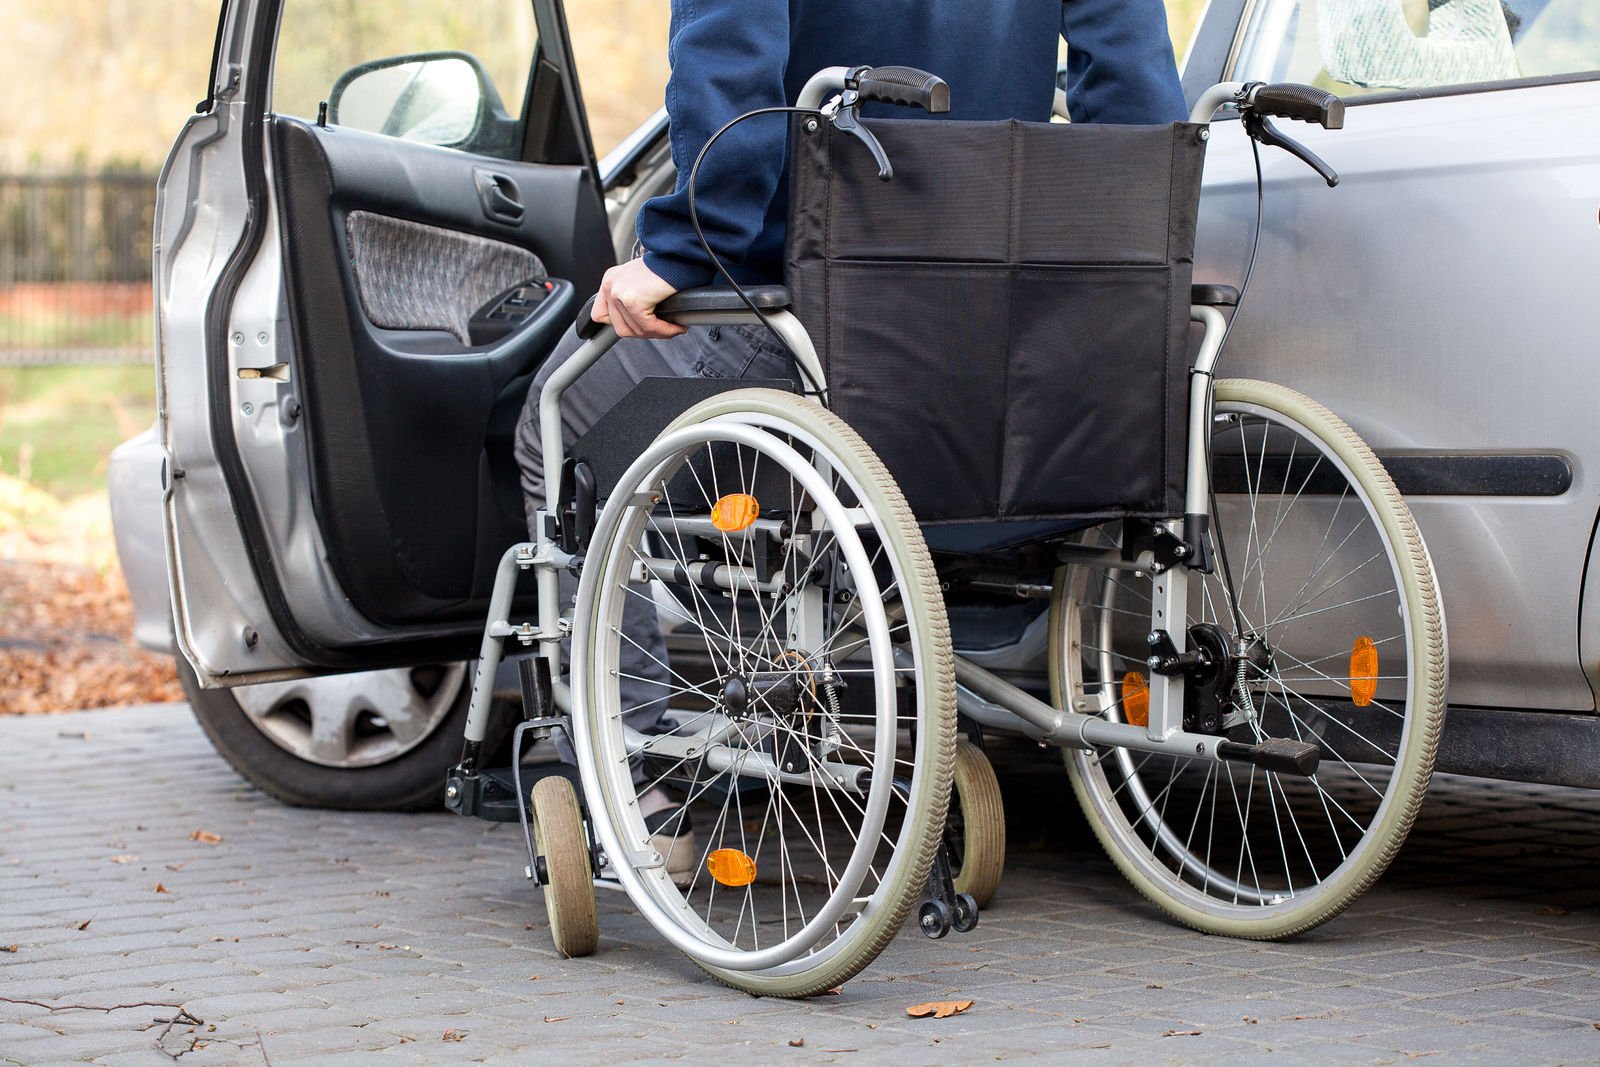 Compare Car Insurance Rates for Disabled Drivers [2023]